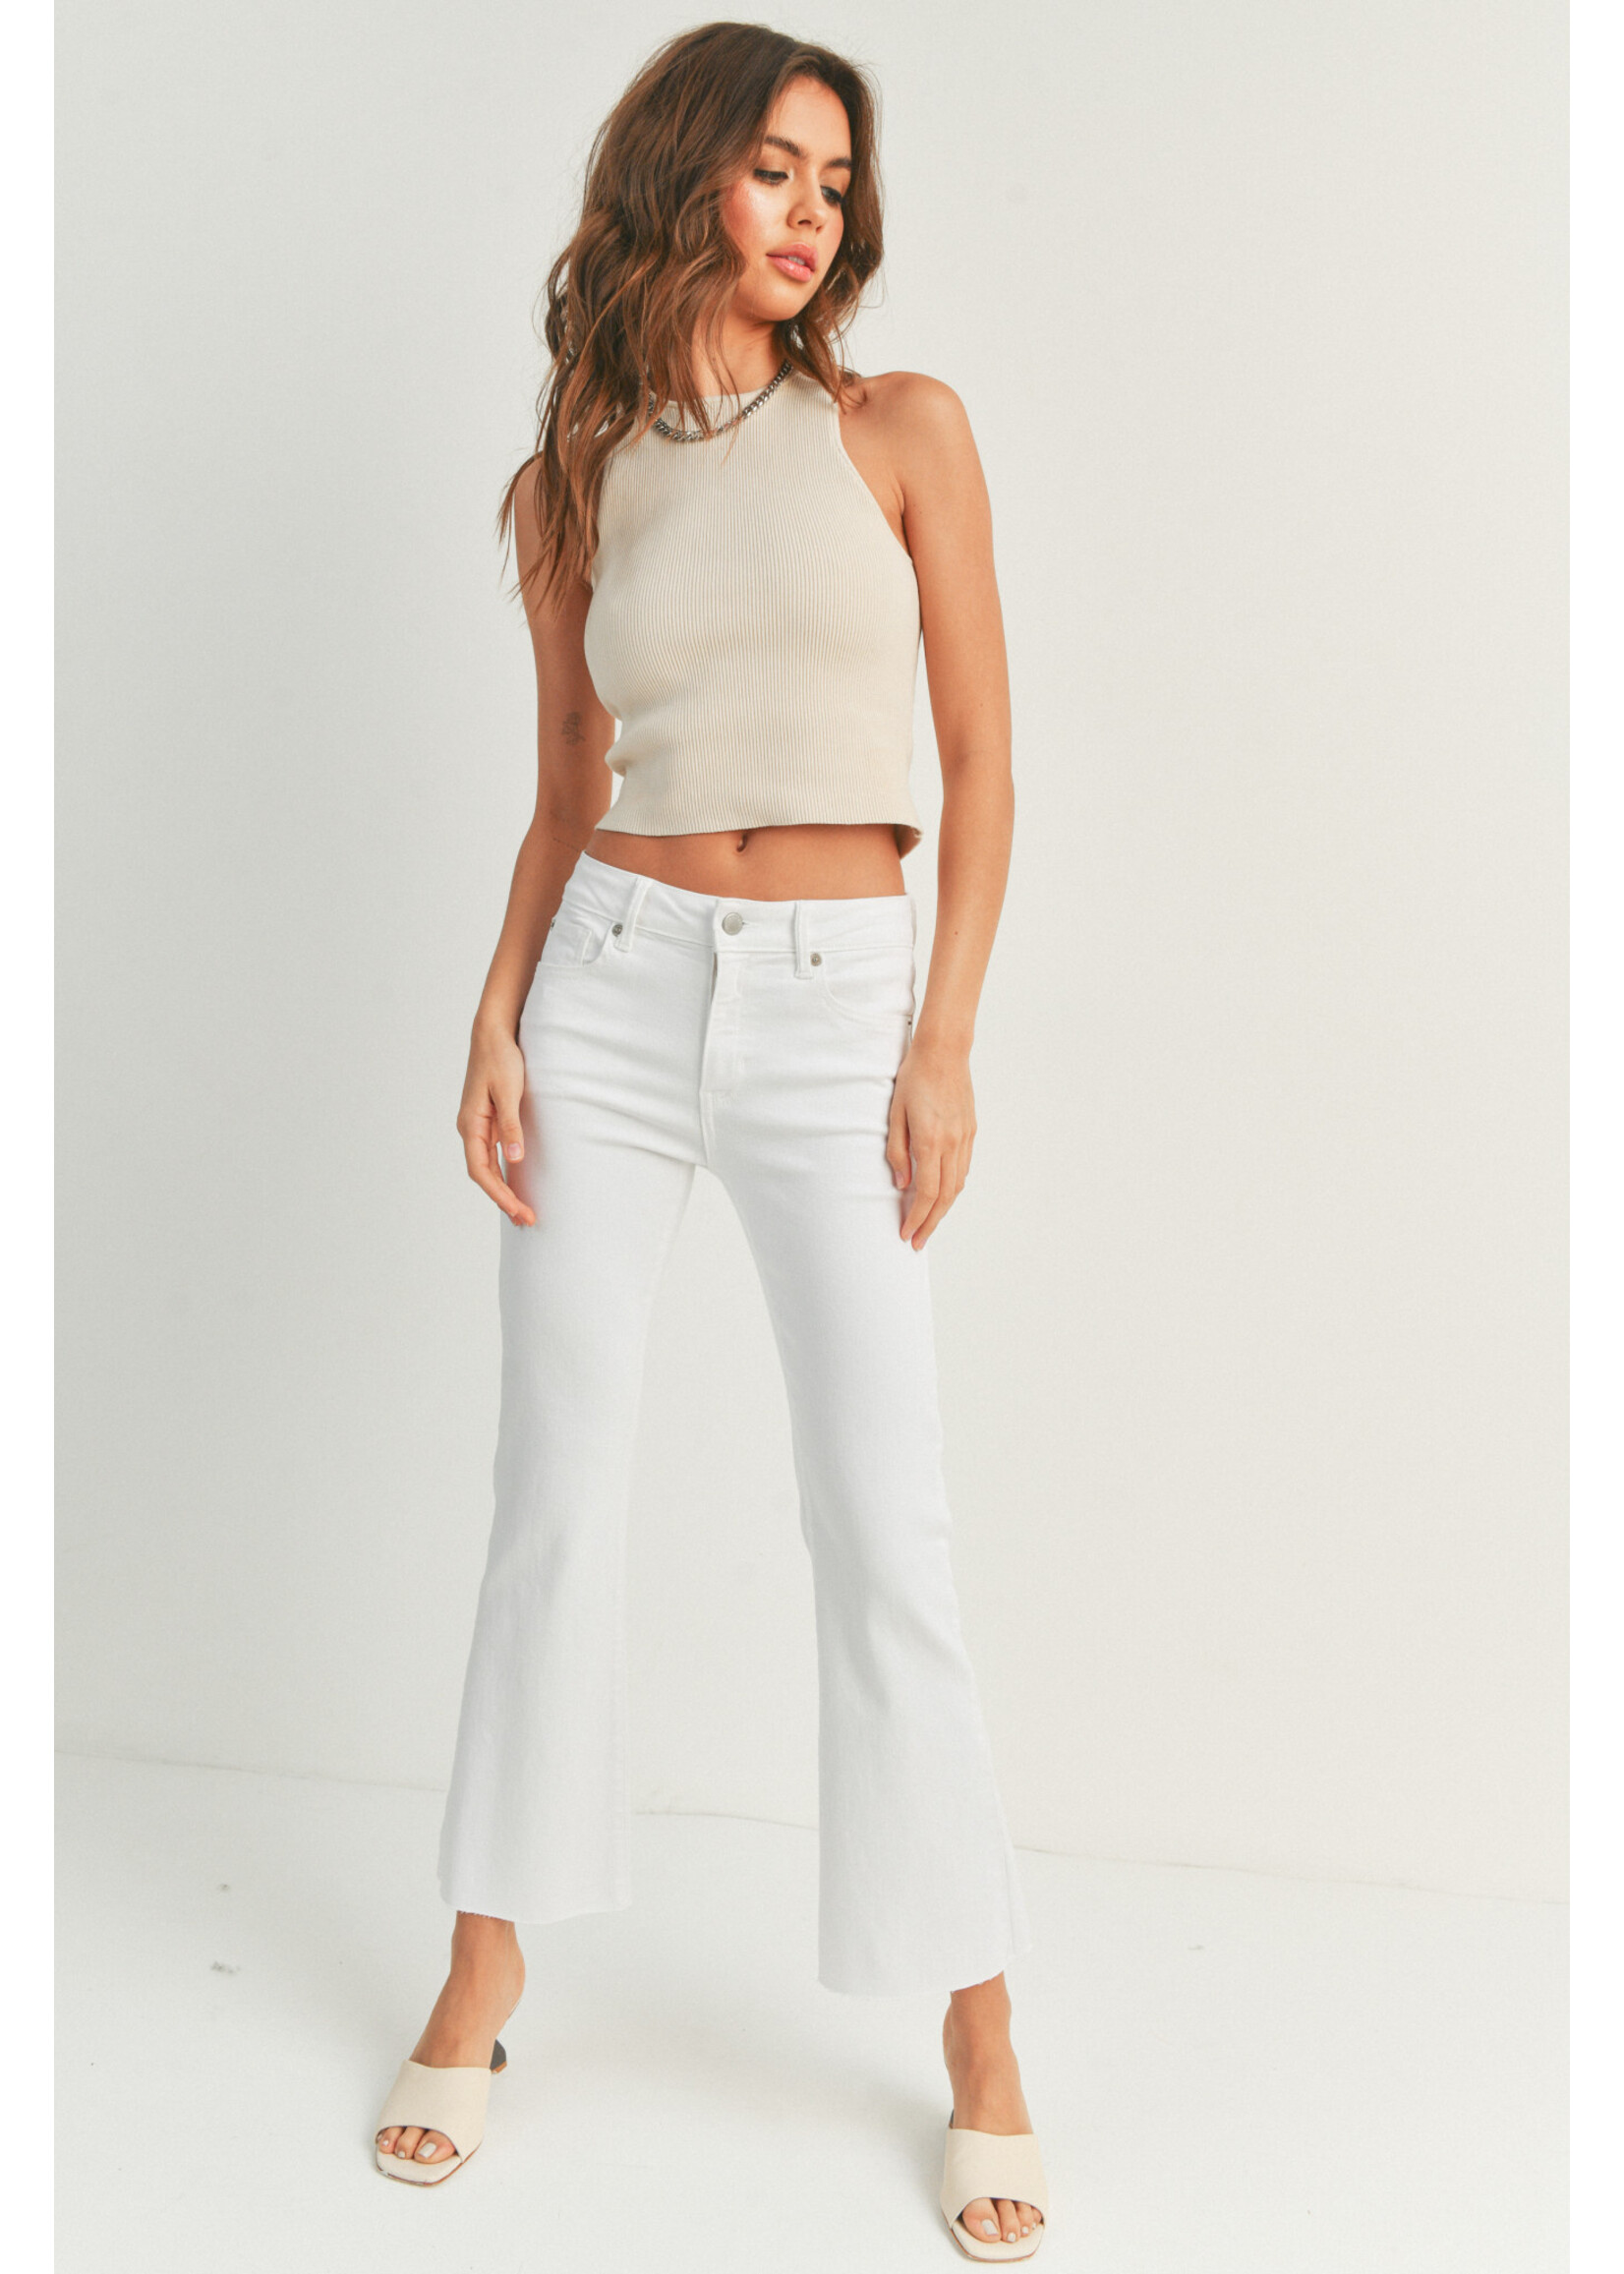 CROPPED FLARE JEAN